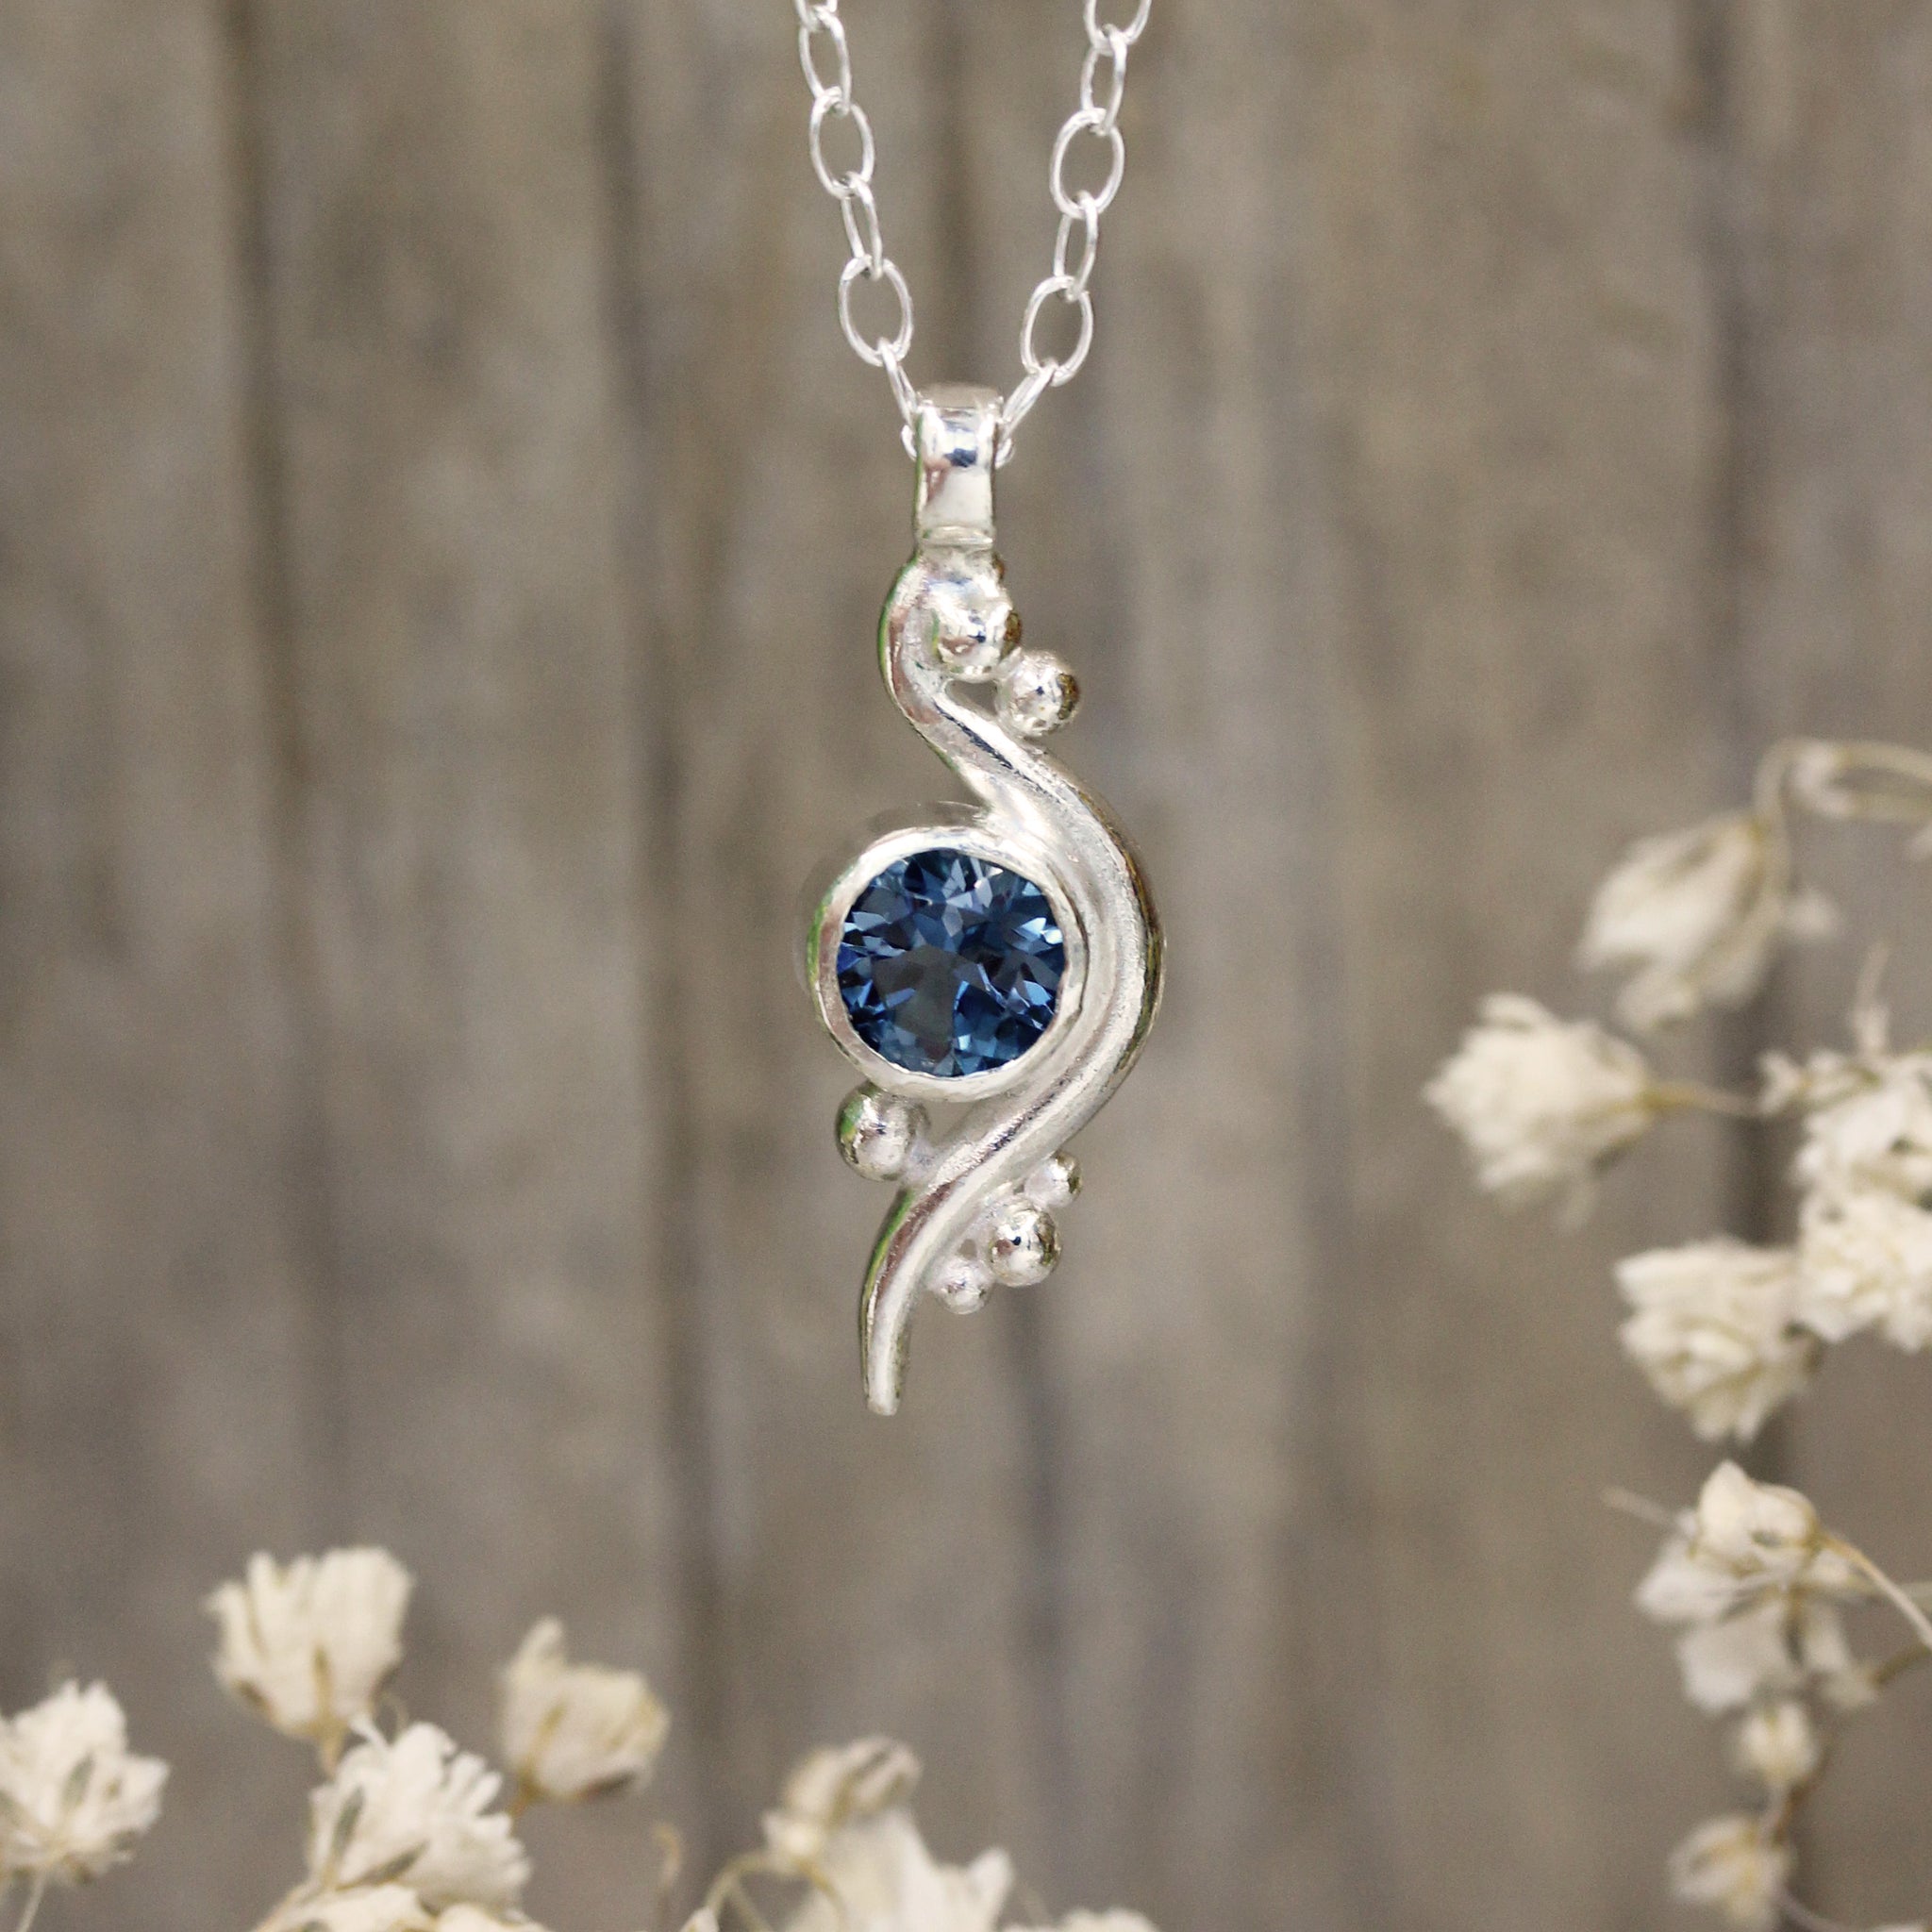 Sea Inspired necklace handmade in recycled silver and London Blue Topaz